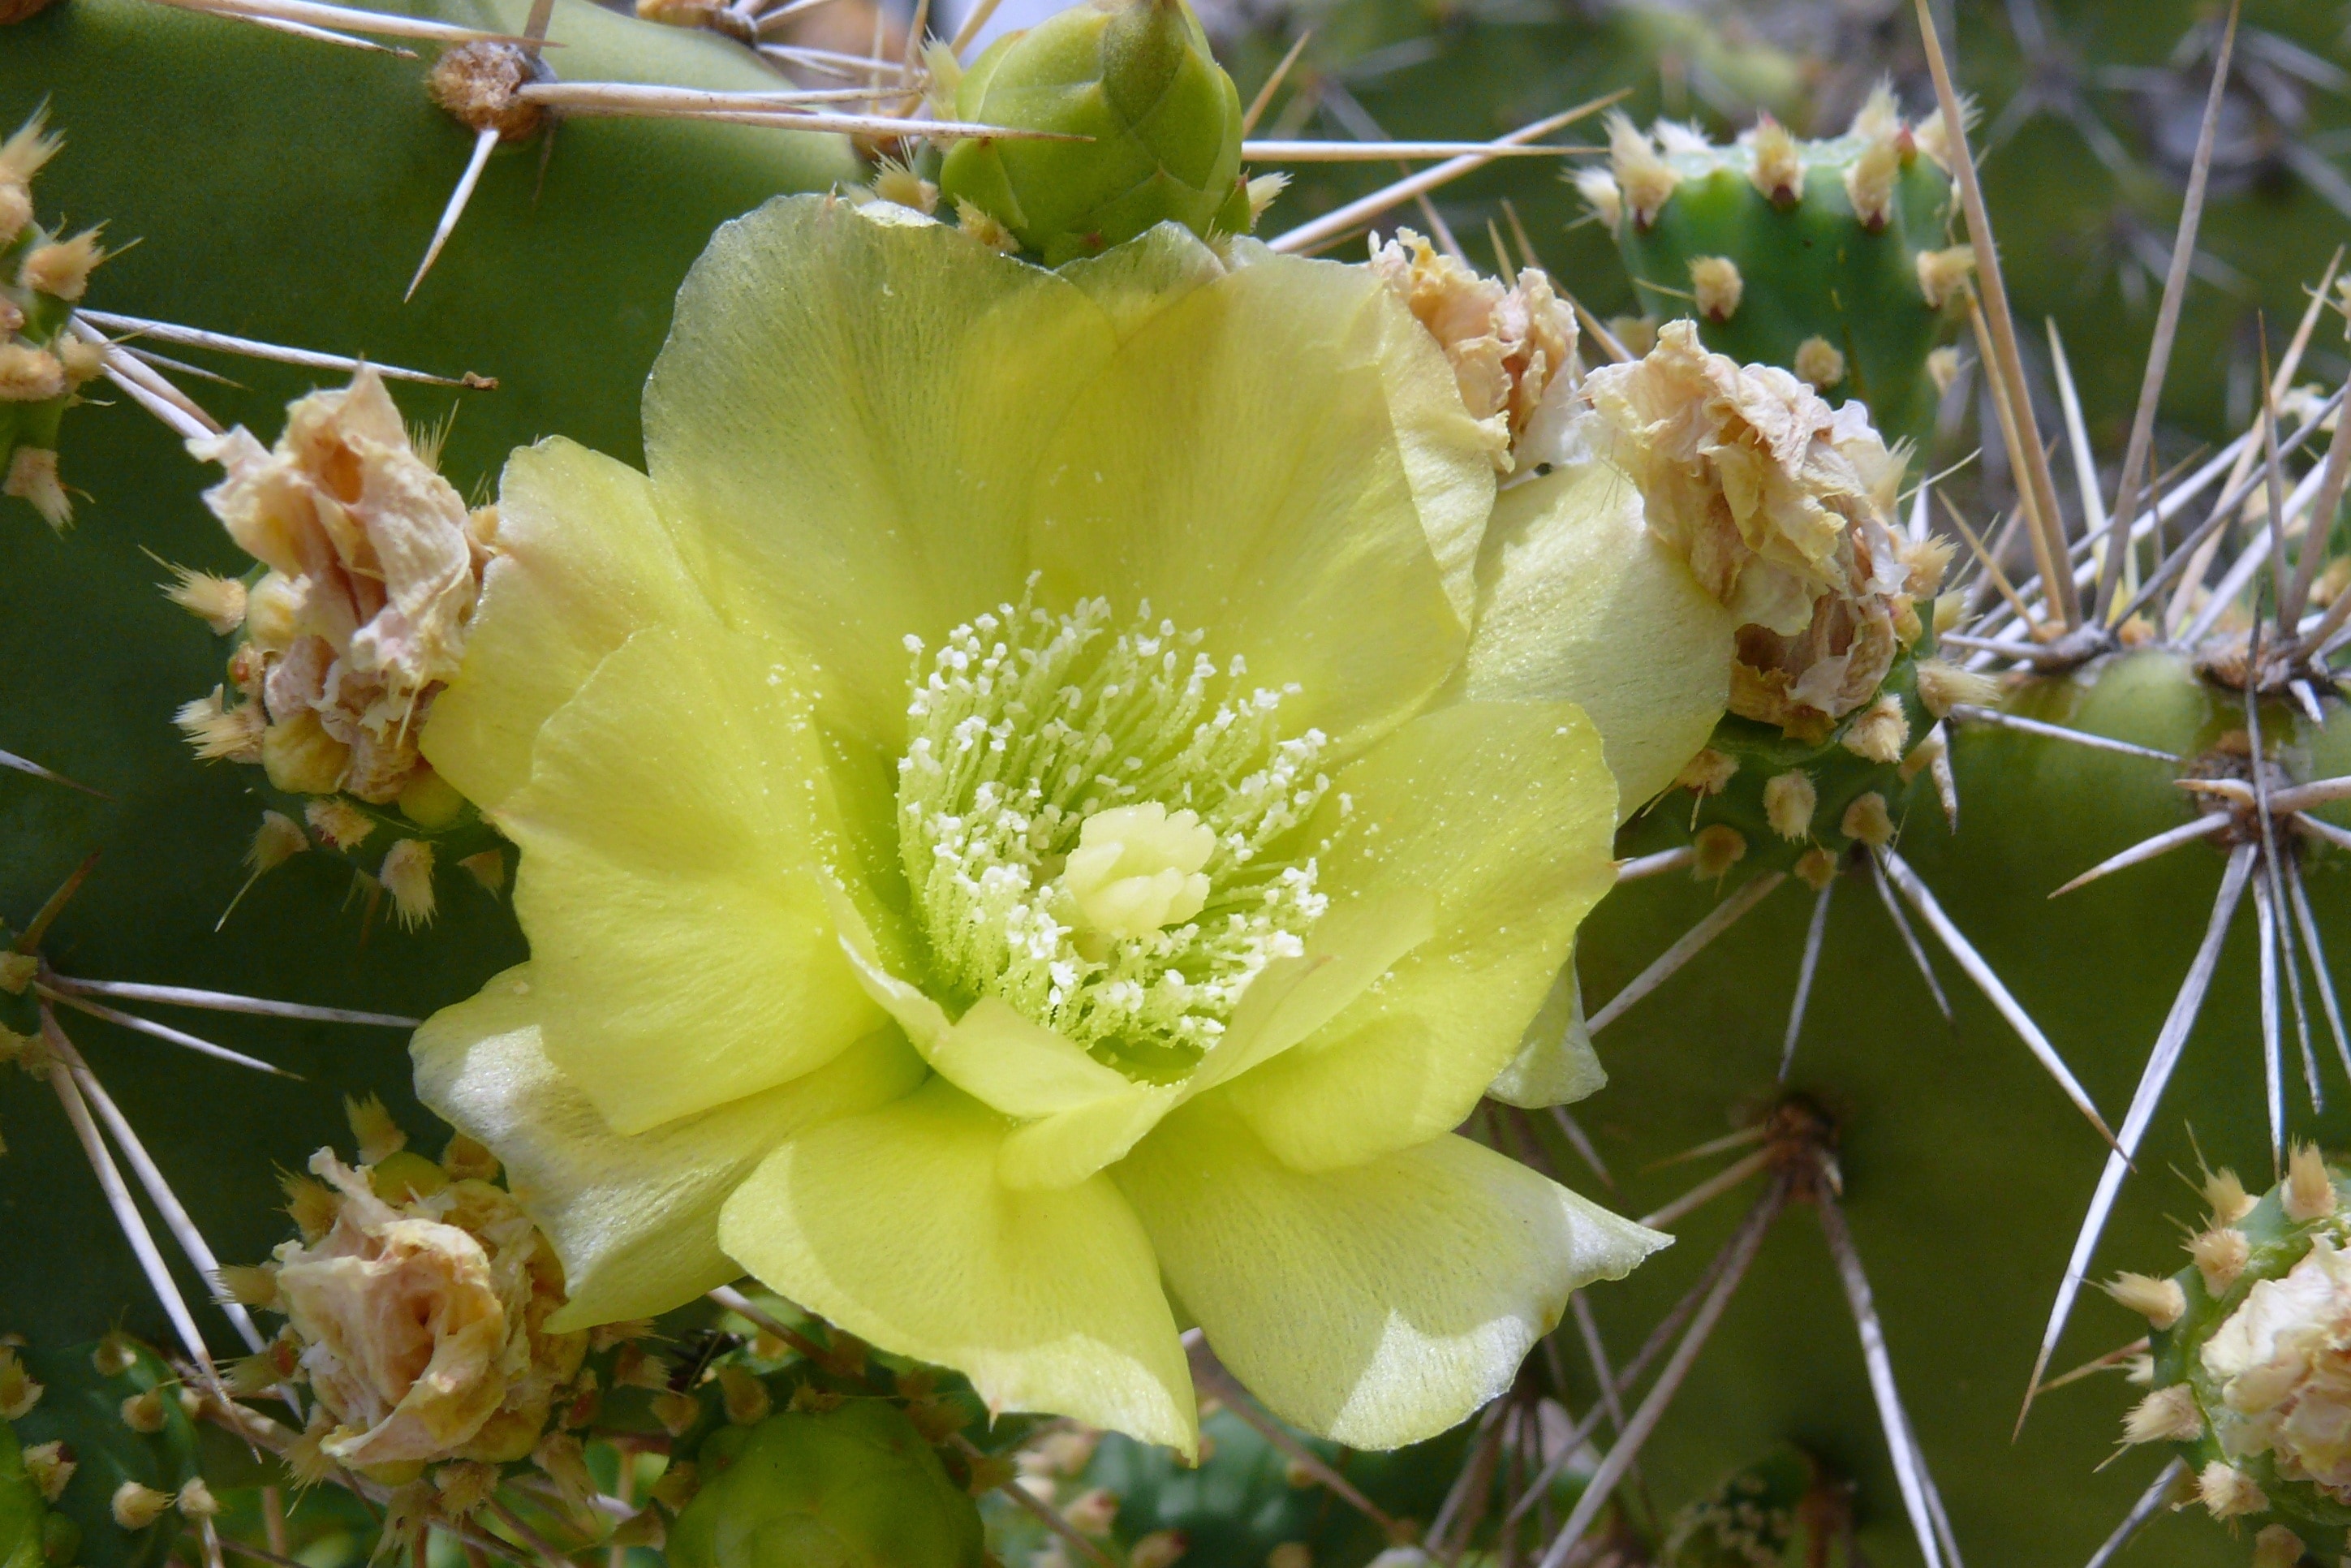 Flowers, Cactus, Blossom, Yellow, green color, vegetable